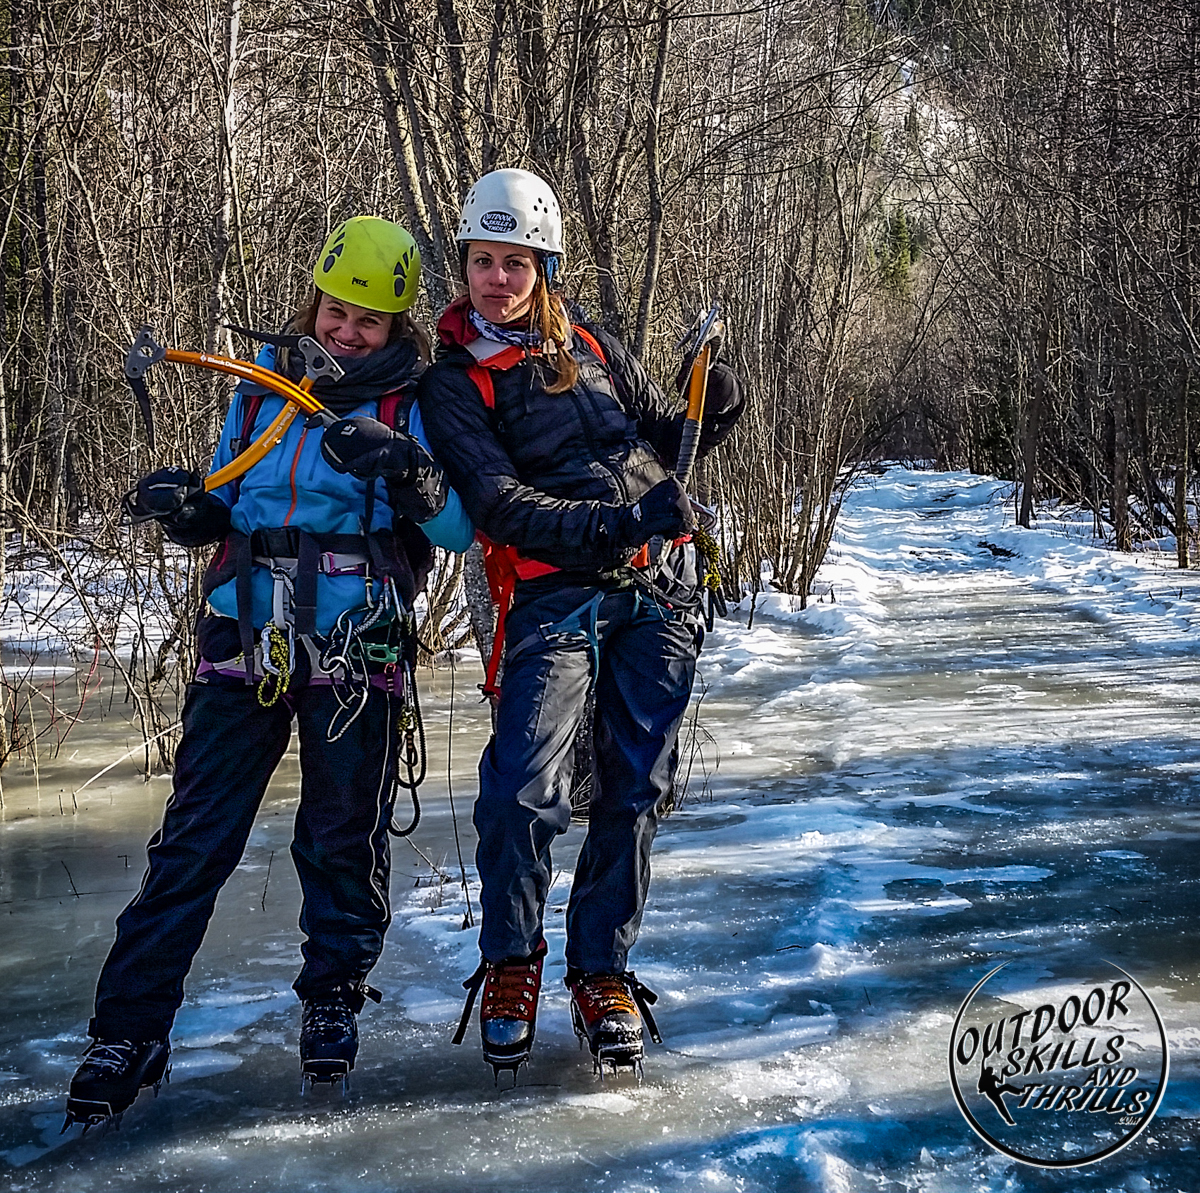 Ice climbing at Thunder Bay -Outdoor Skills And Thrills -Photo by Aric Fishman